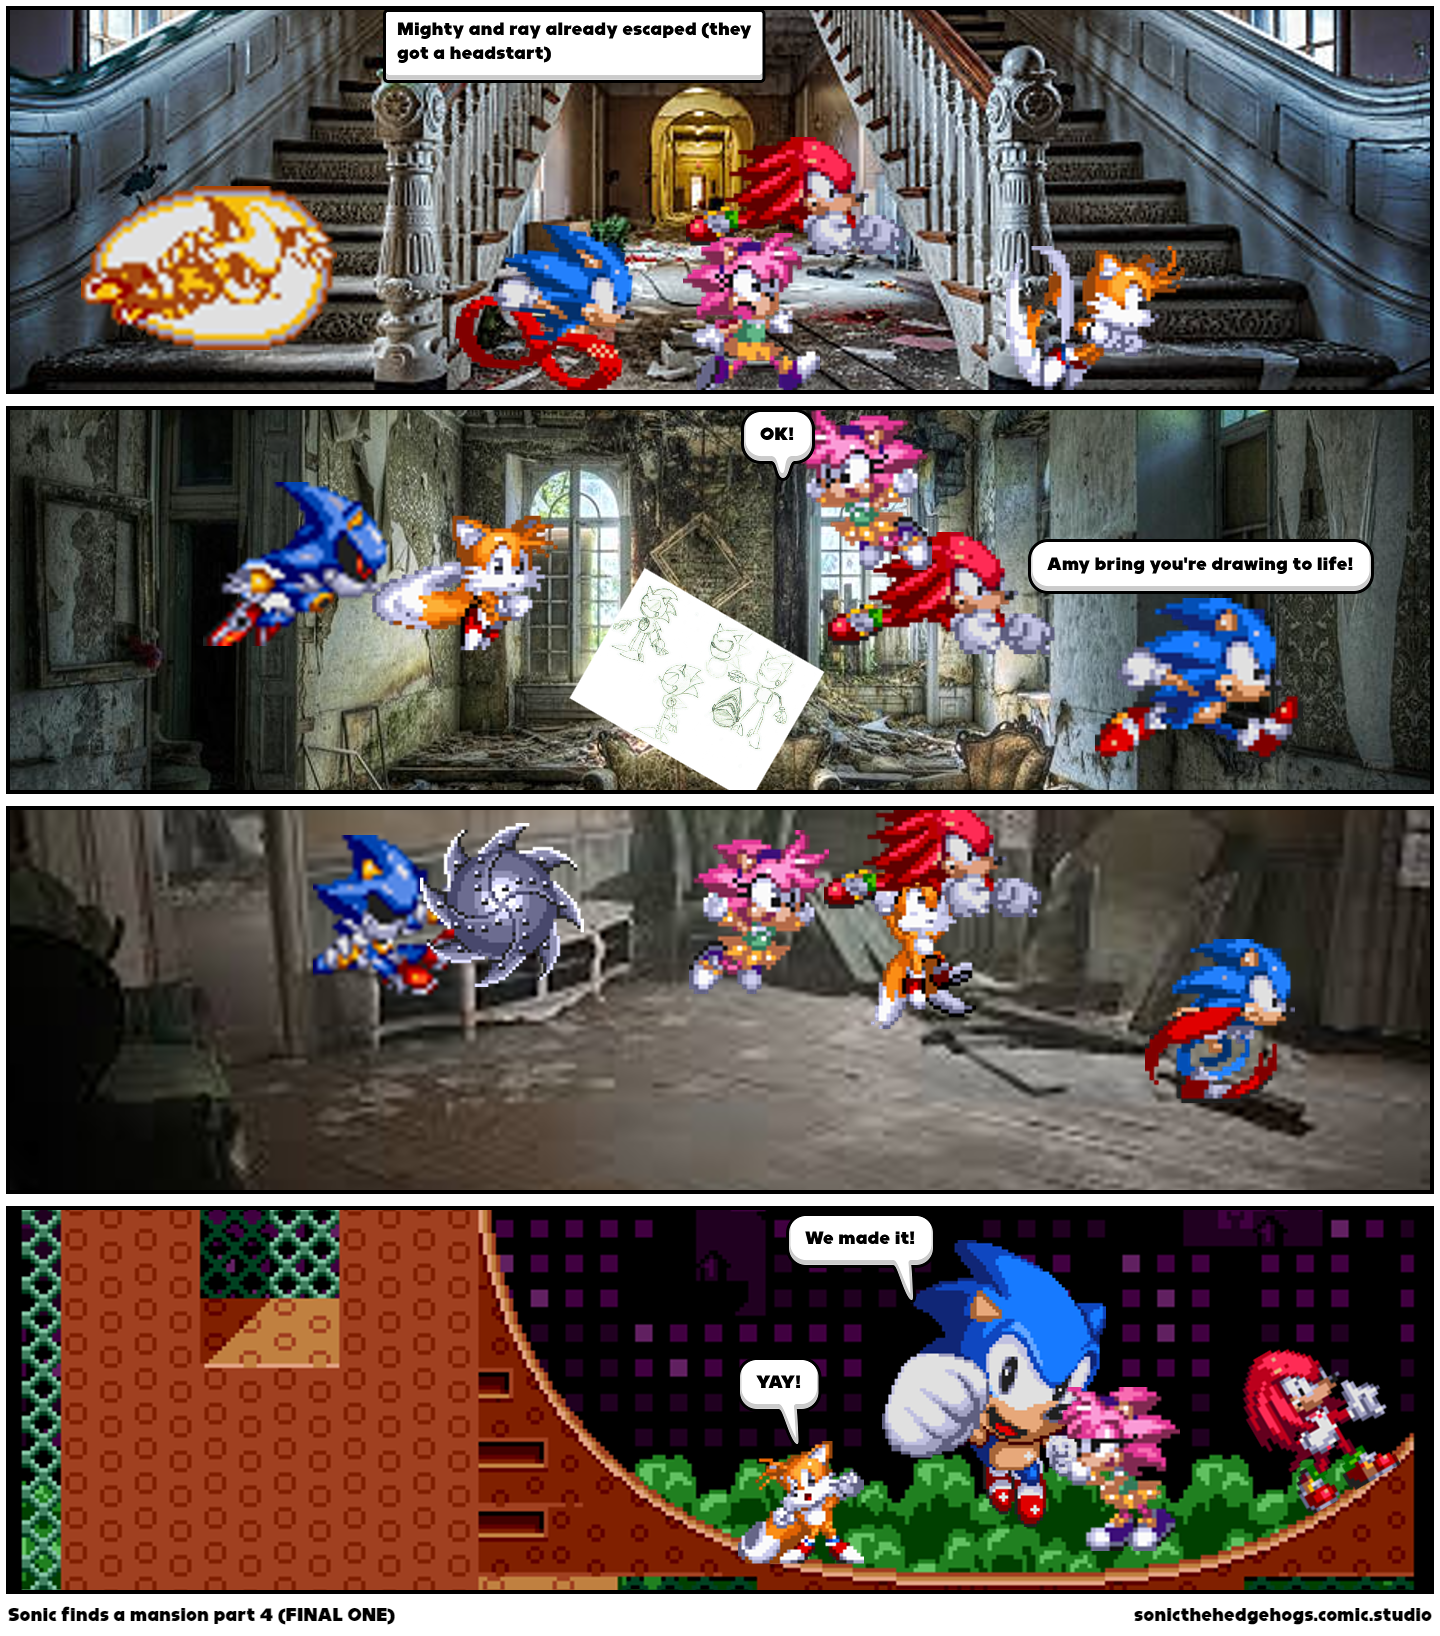 Sonic finds a mansion part 4 (FINAL ONE)